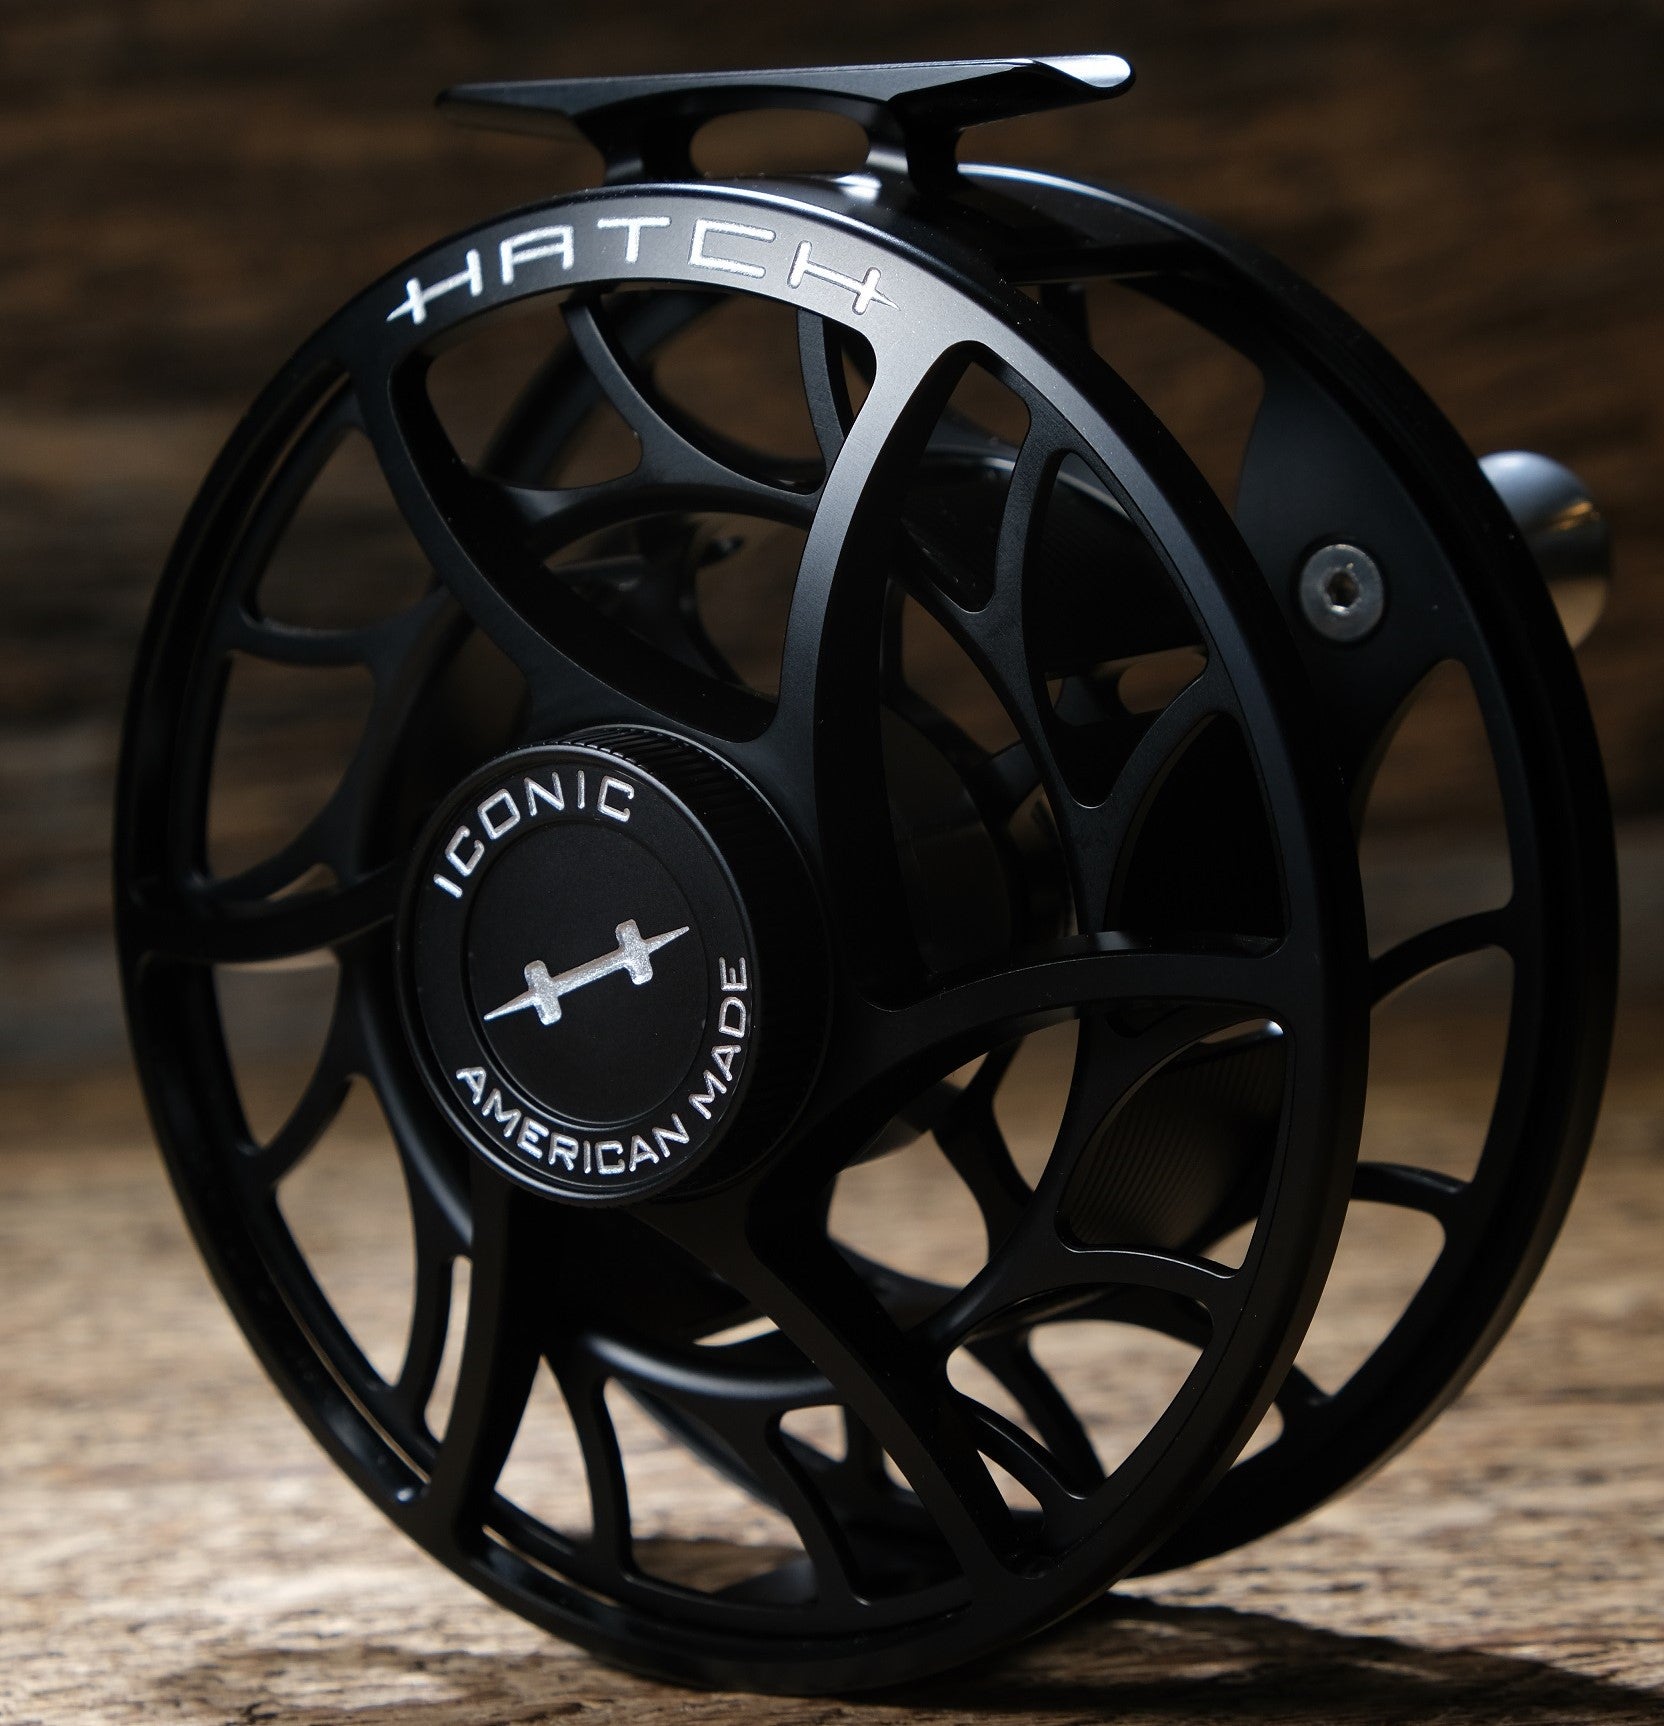 Hatch Iconic 3 Plus Fly Reel Black/Silver / Large Arbor